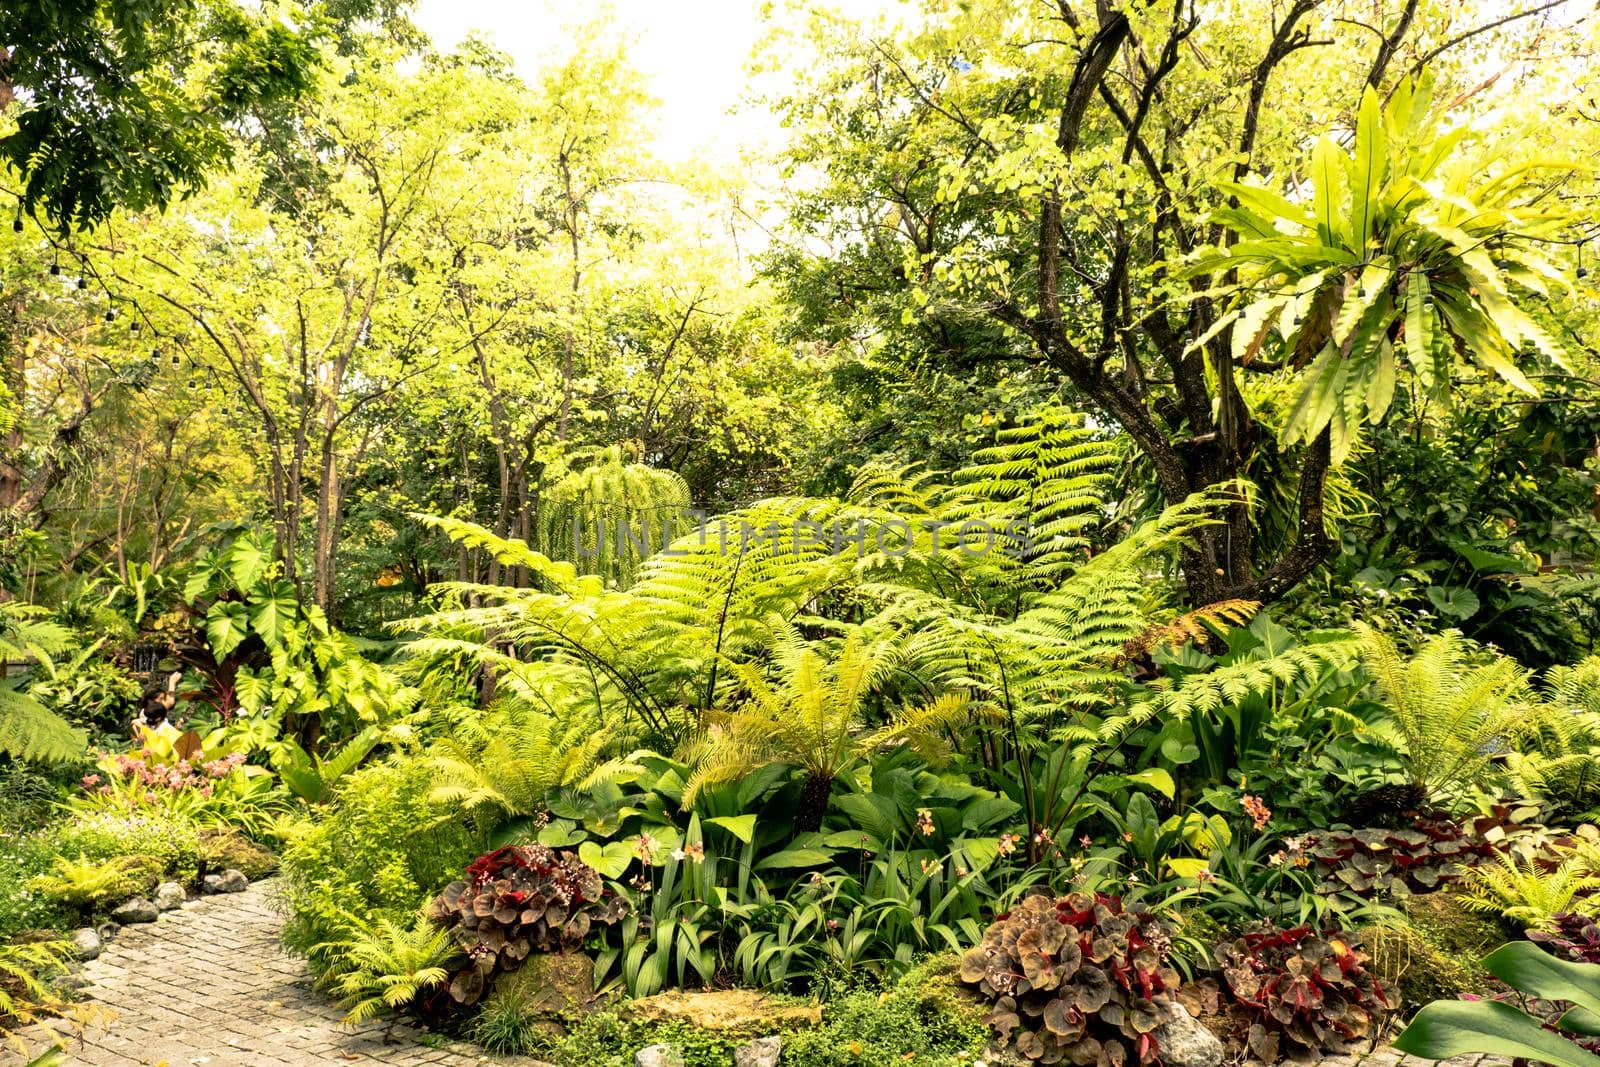 Green nature of Fern and trees in tropical garden nture background. by Petrichor